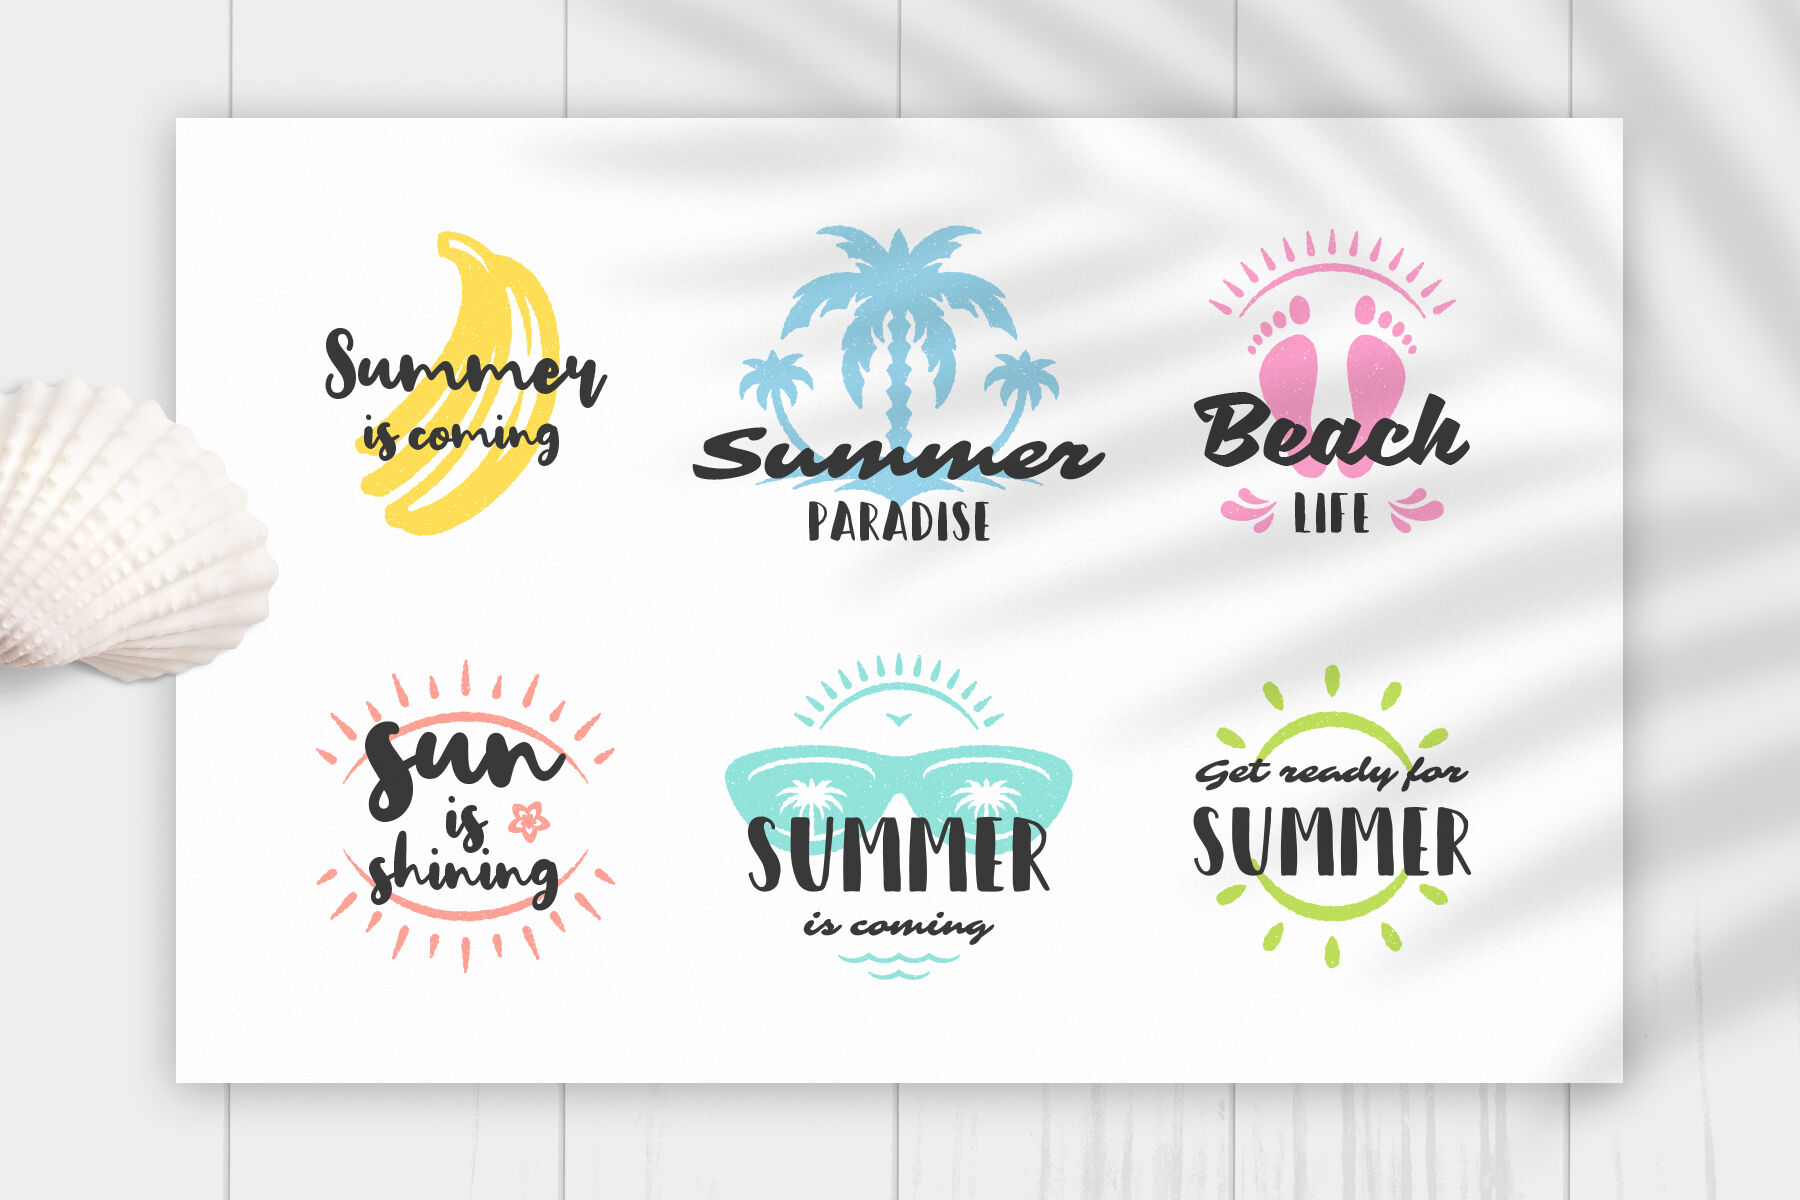 Get ready for summer quotes 213644-Ready for summer quotes